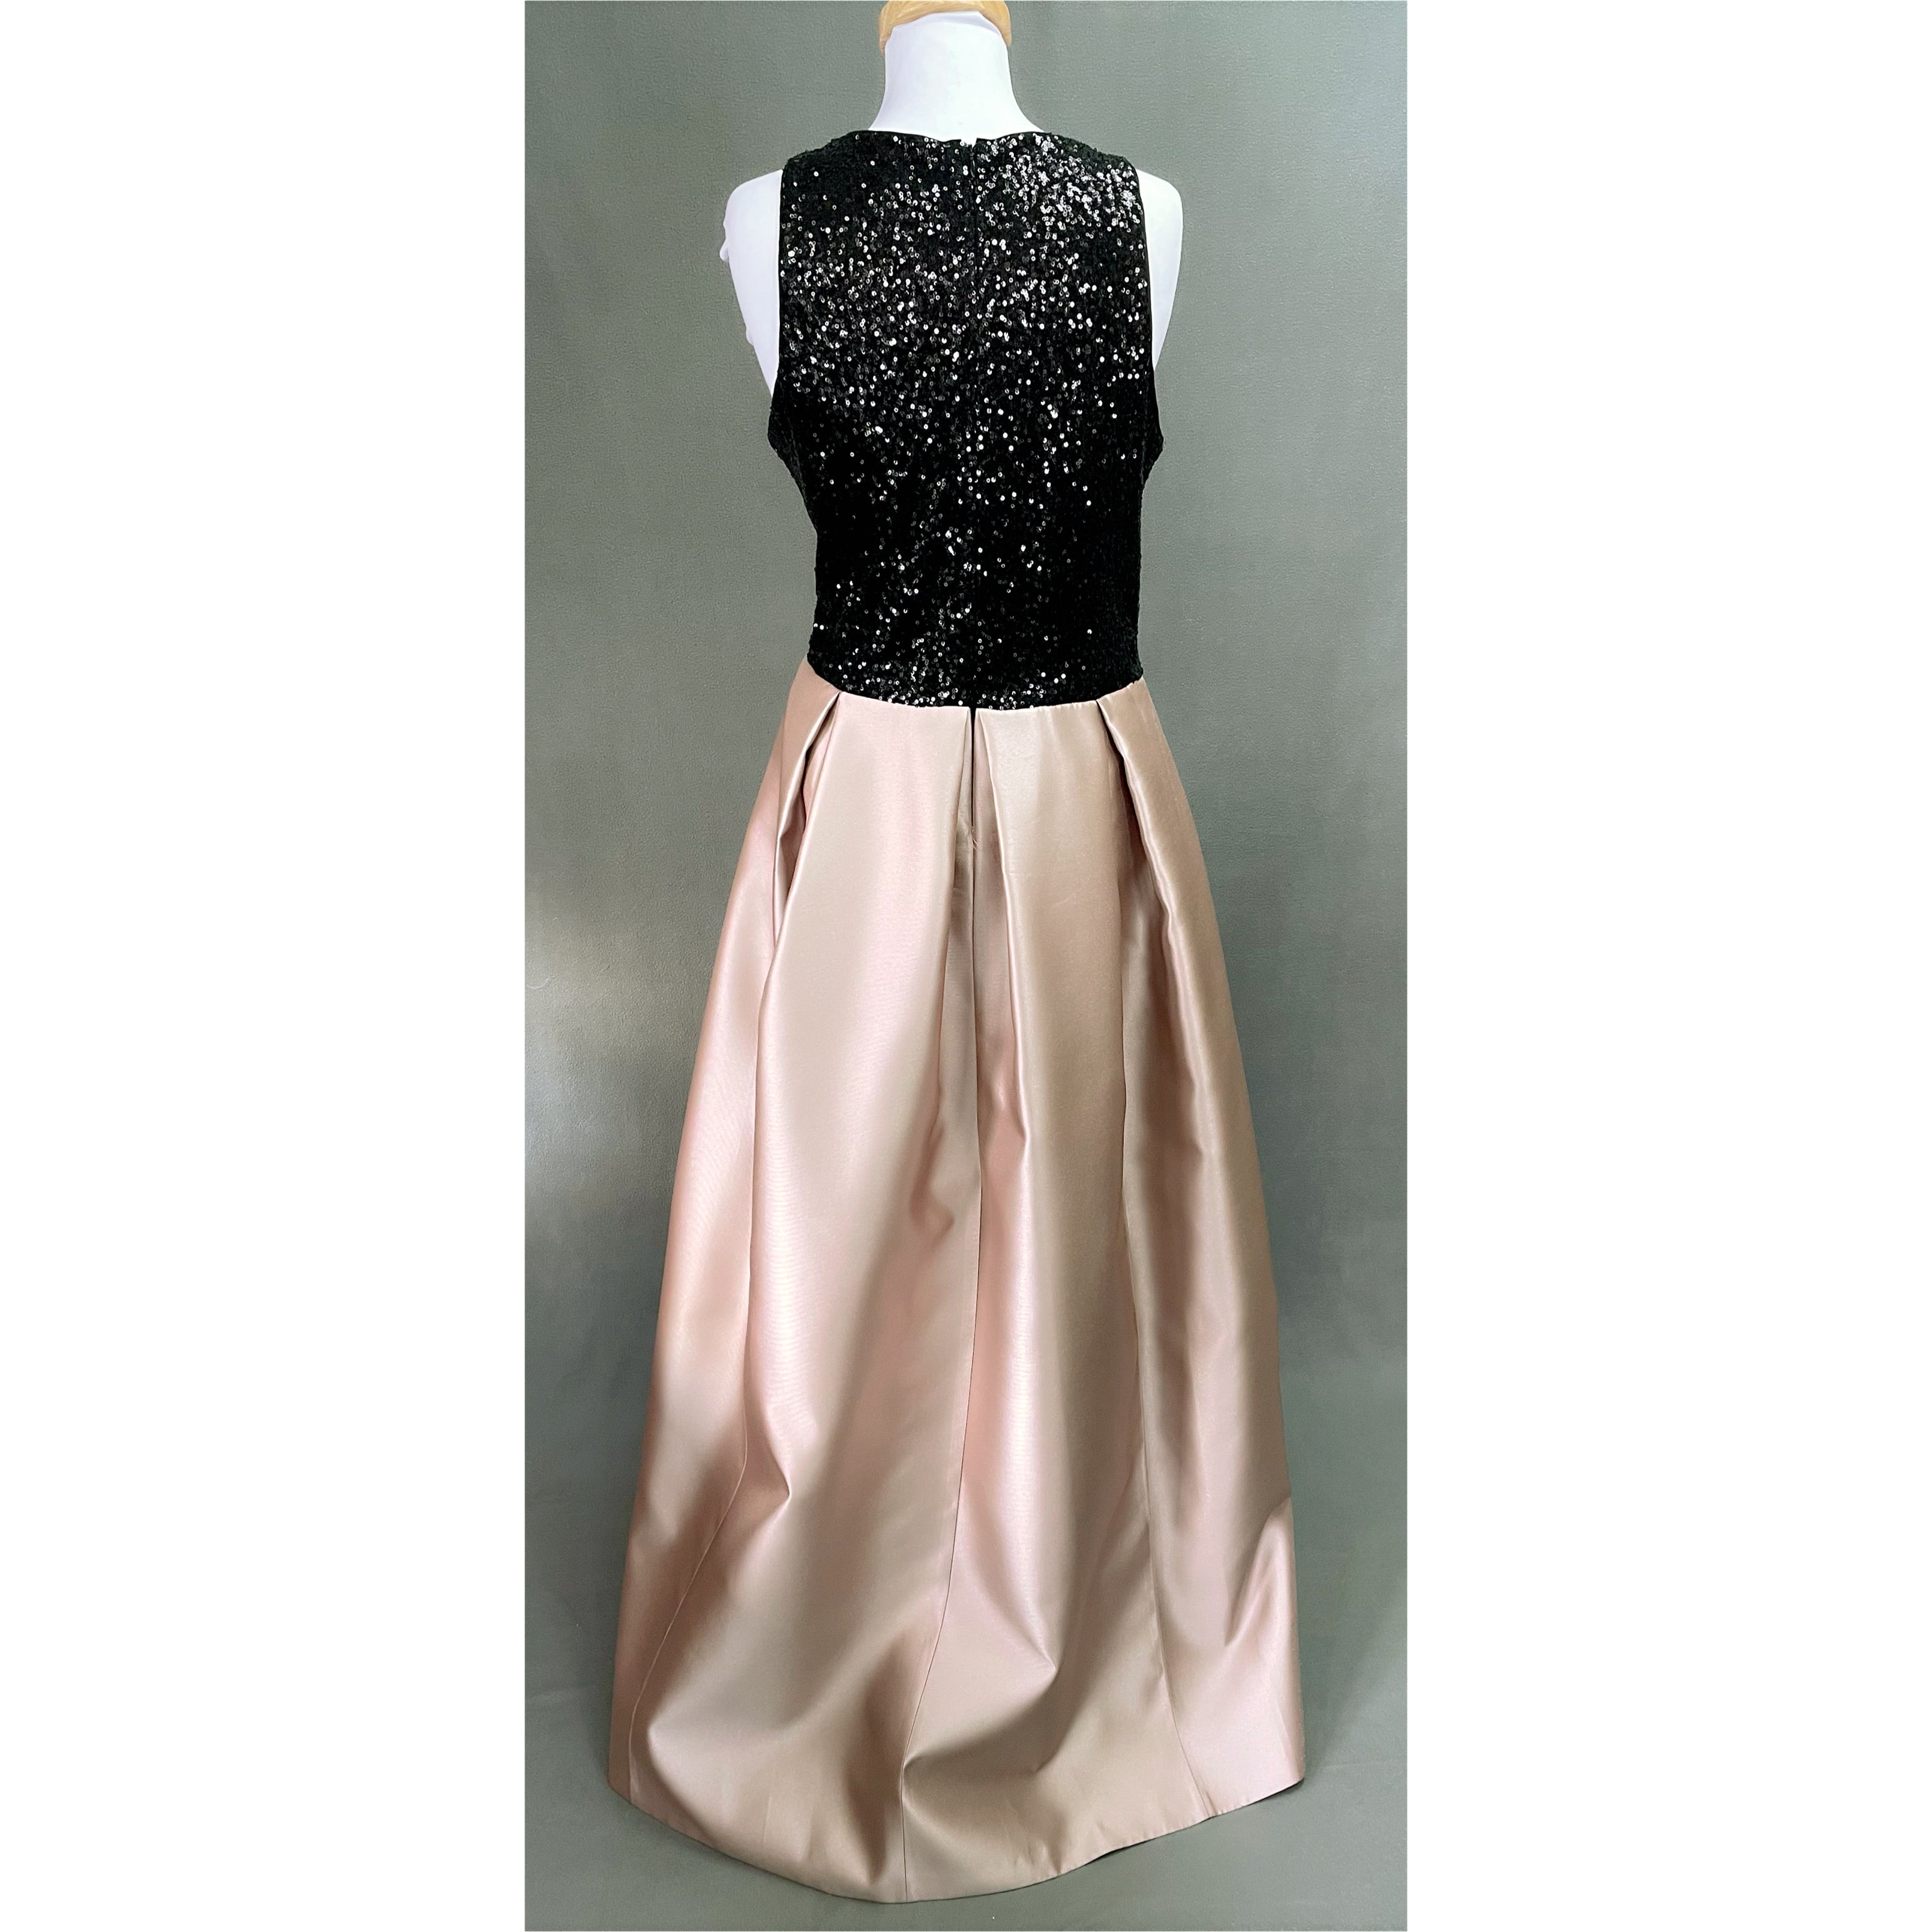 Cachet black and champagne dress, size 16